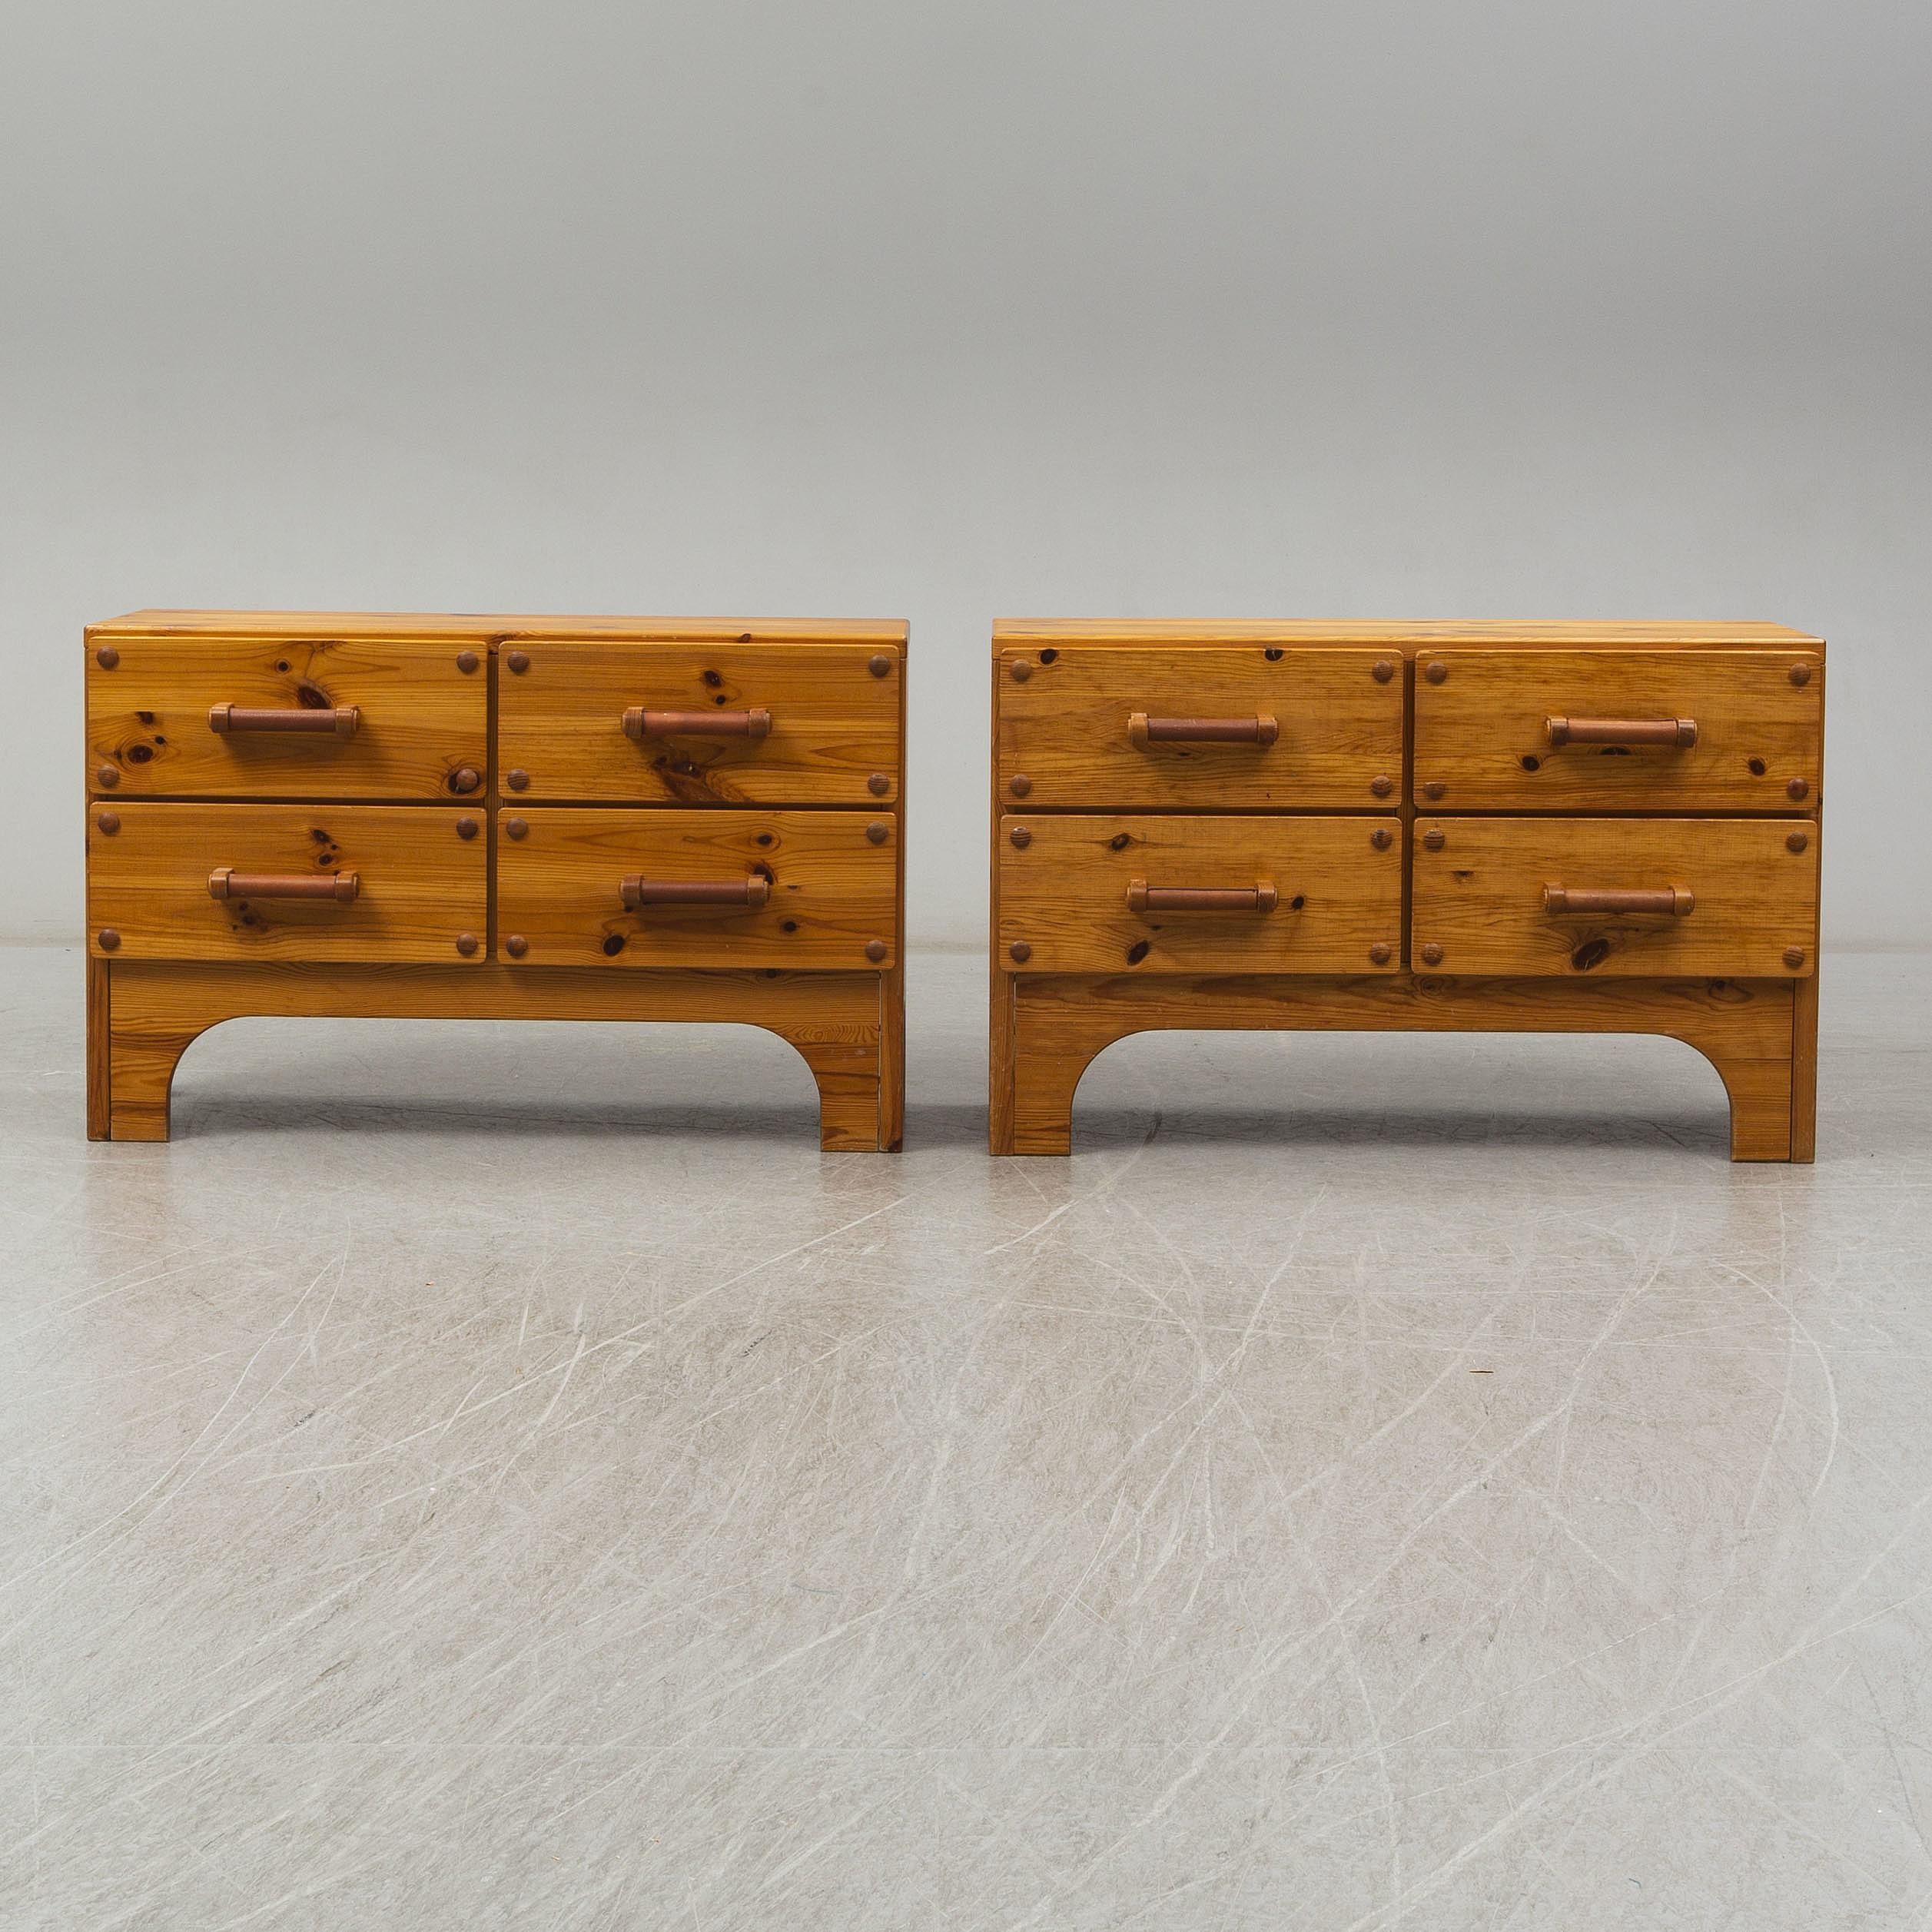 A nice pair of pinewood dressers, good condition, c.1970, depth 45cm with handles.